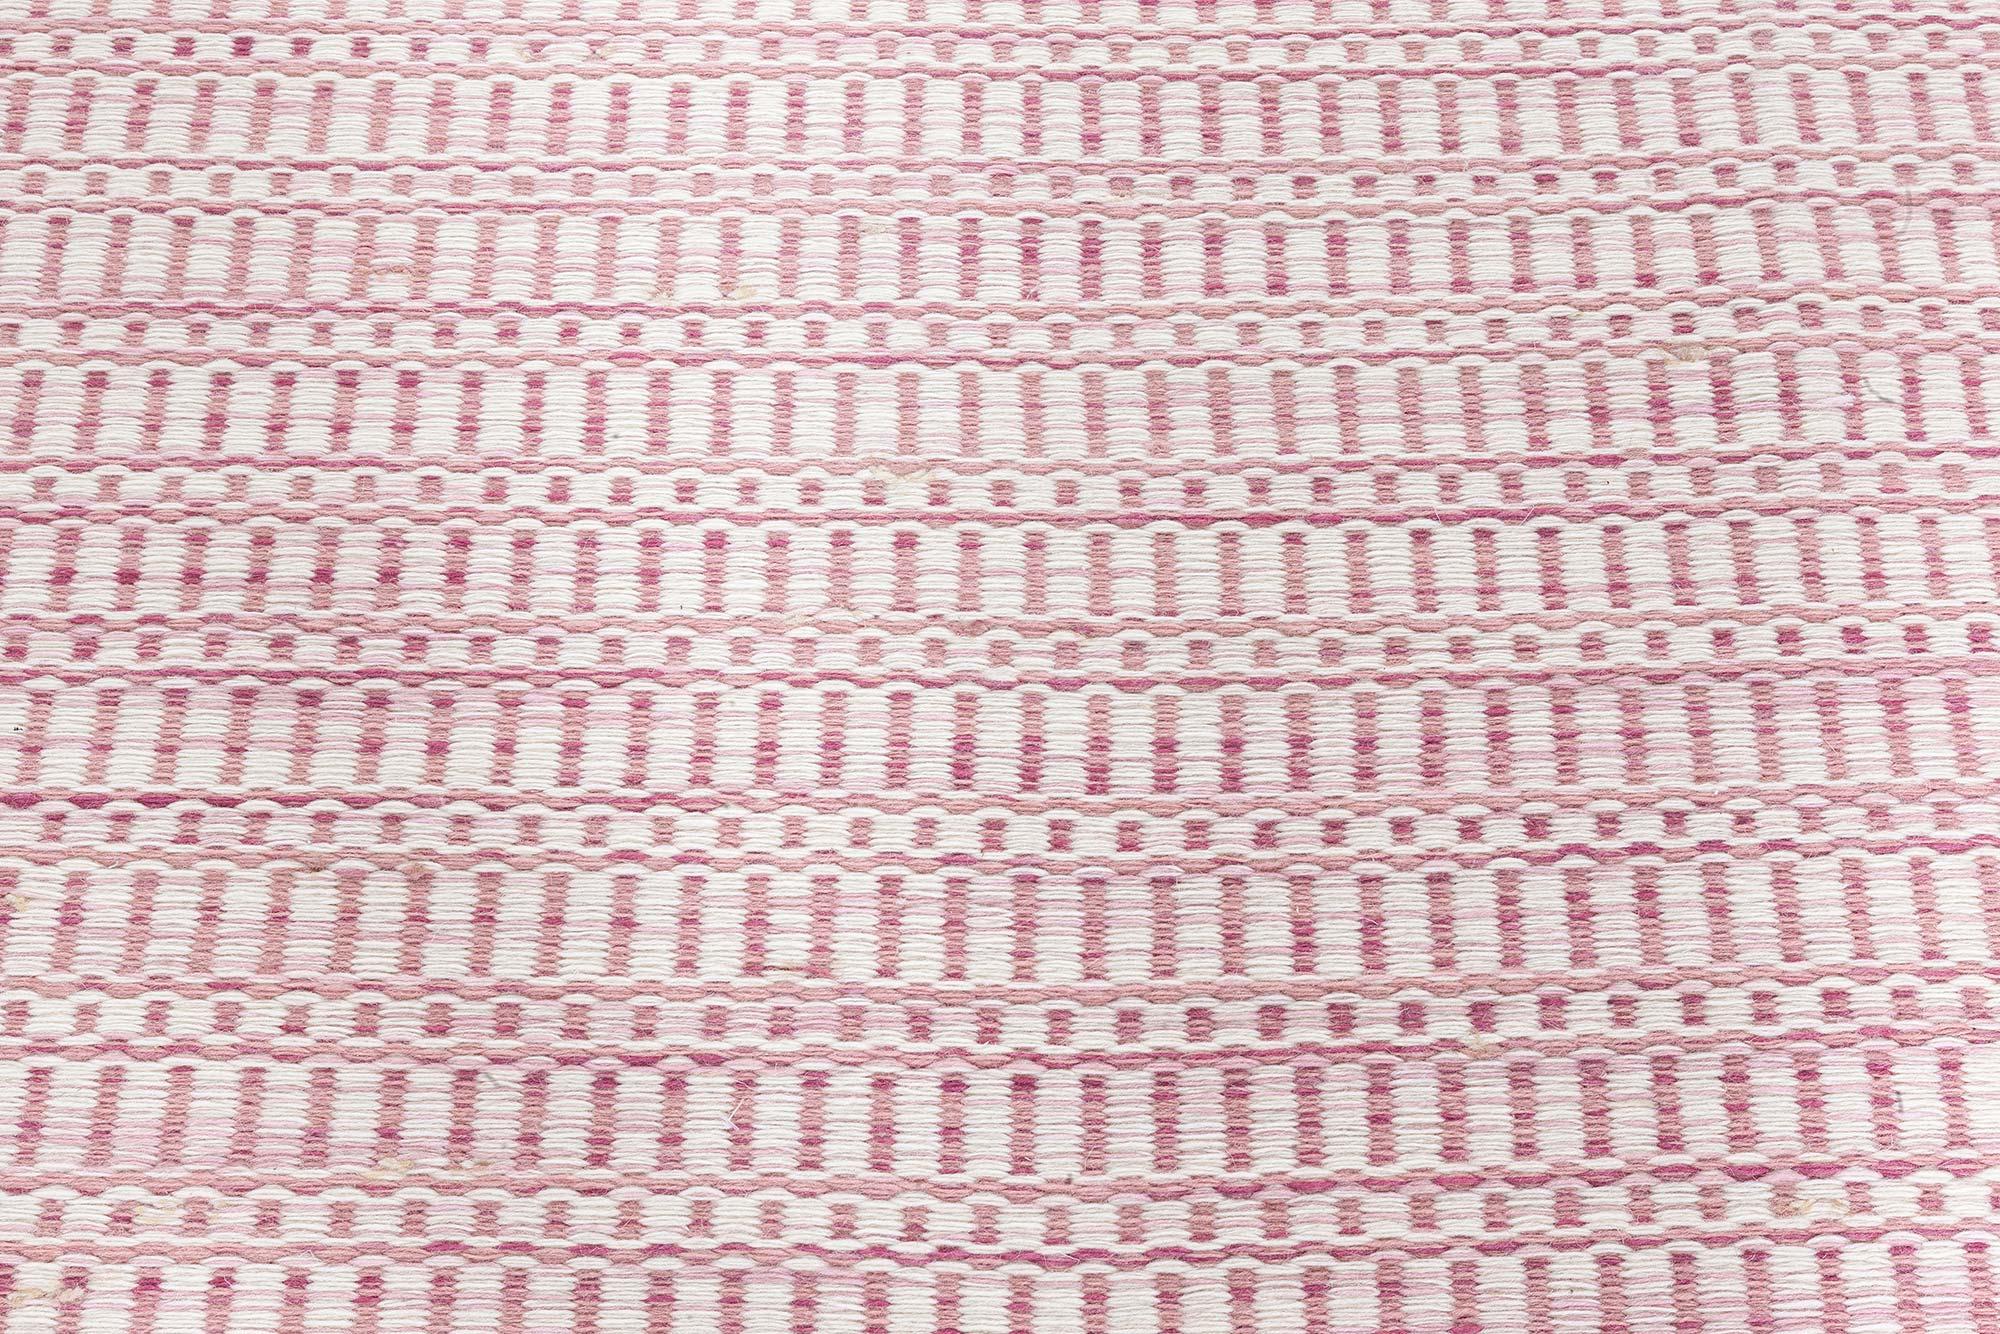 Hand-Woven Modern Pink and Beige Flat Weave Rug by Doris Leslie Blau For Sale